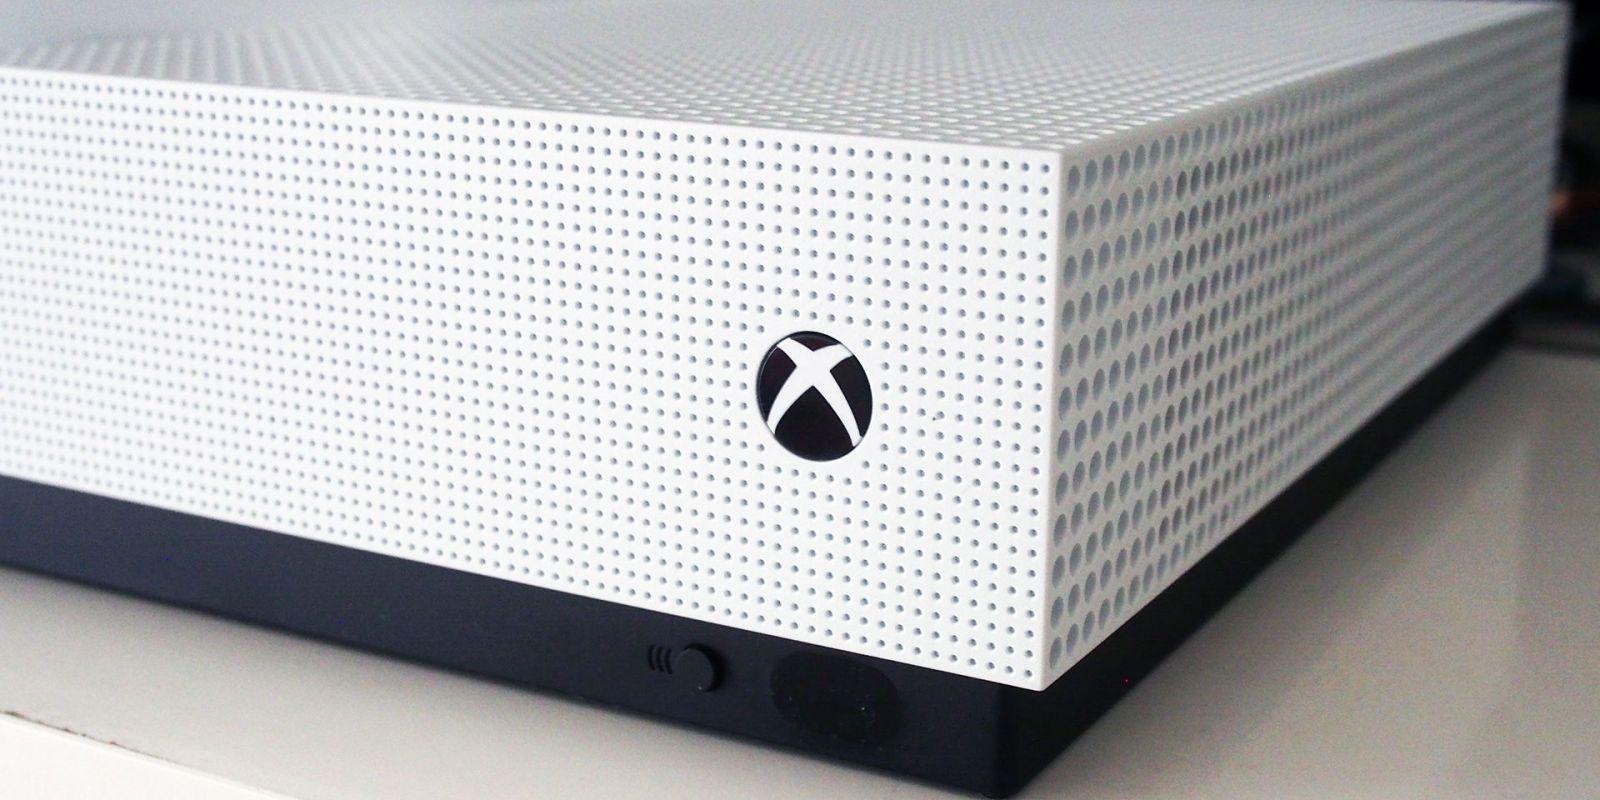 Xbox One tips, tricks and secrets